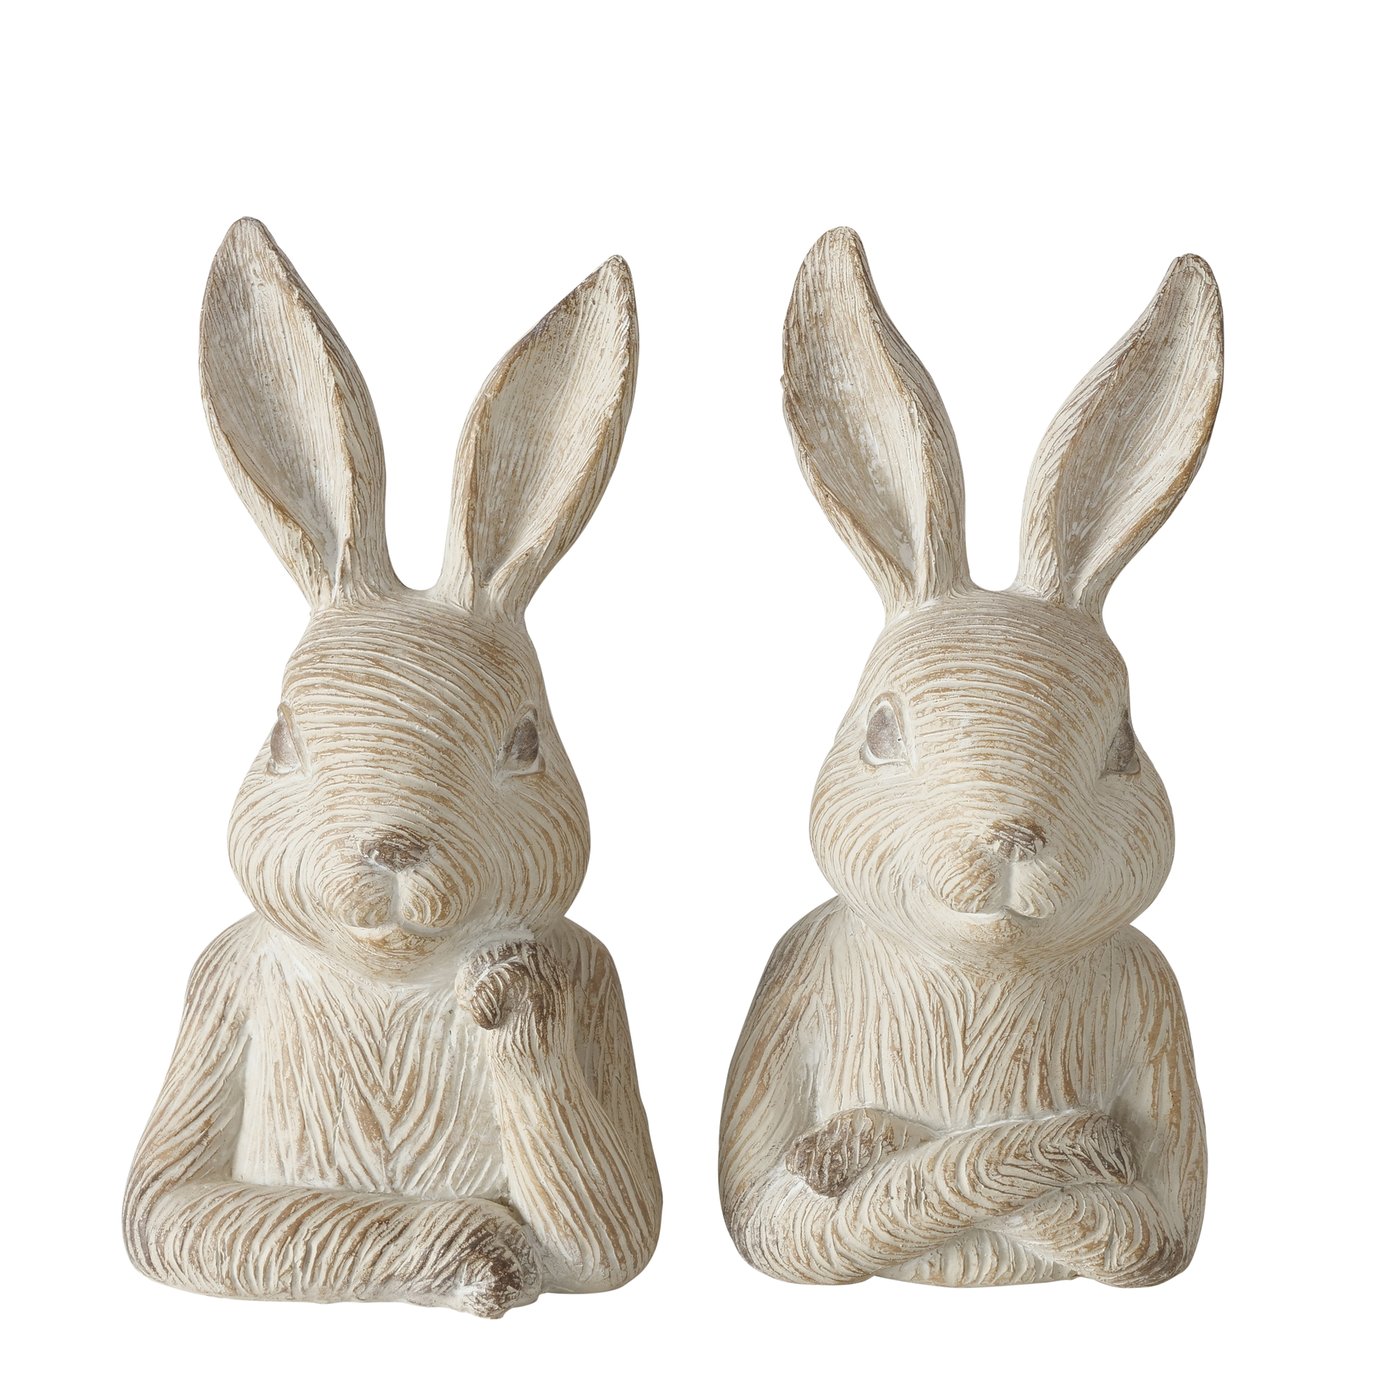 &Quirky Rabbit Head Figure : Hand on Chin or Arms Crossed